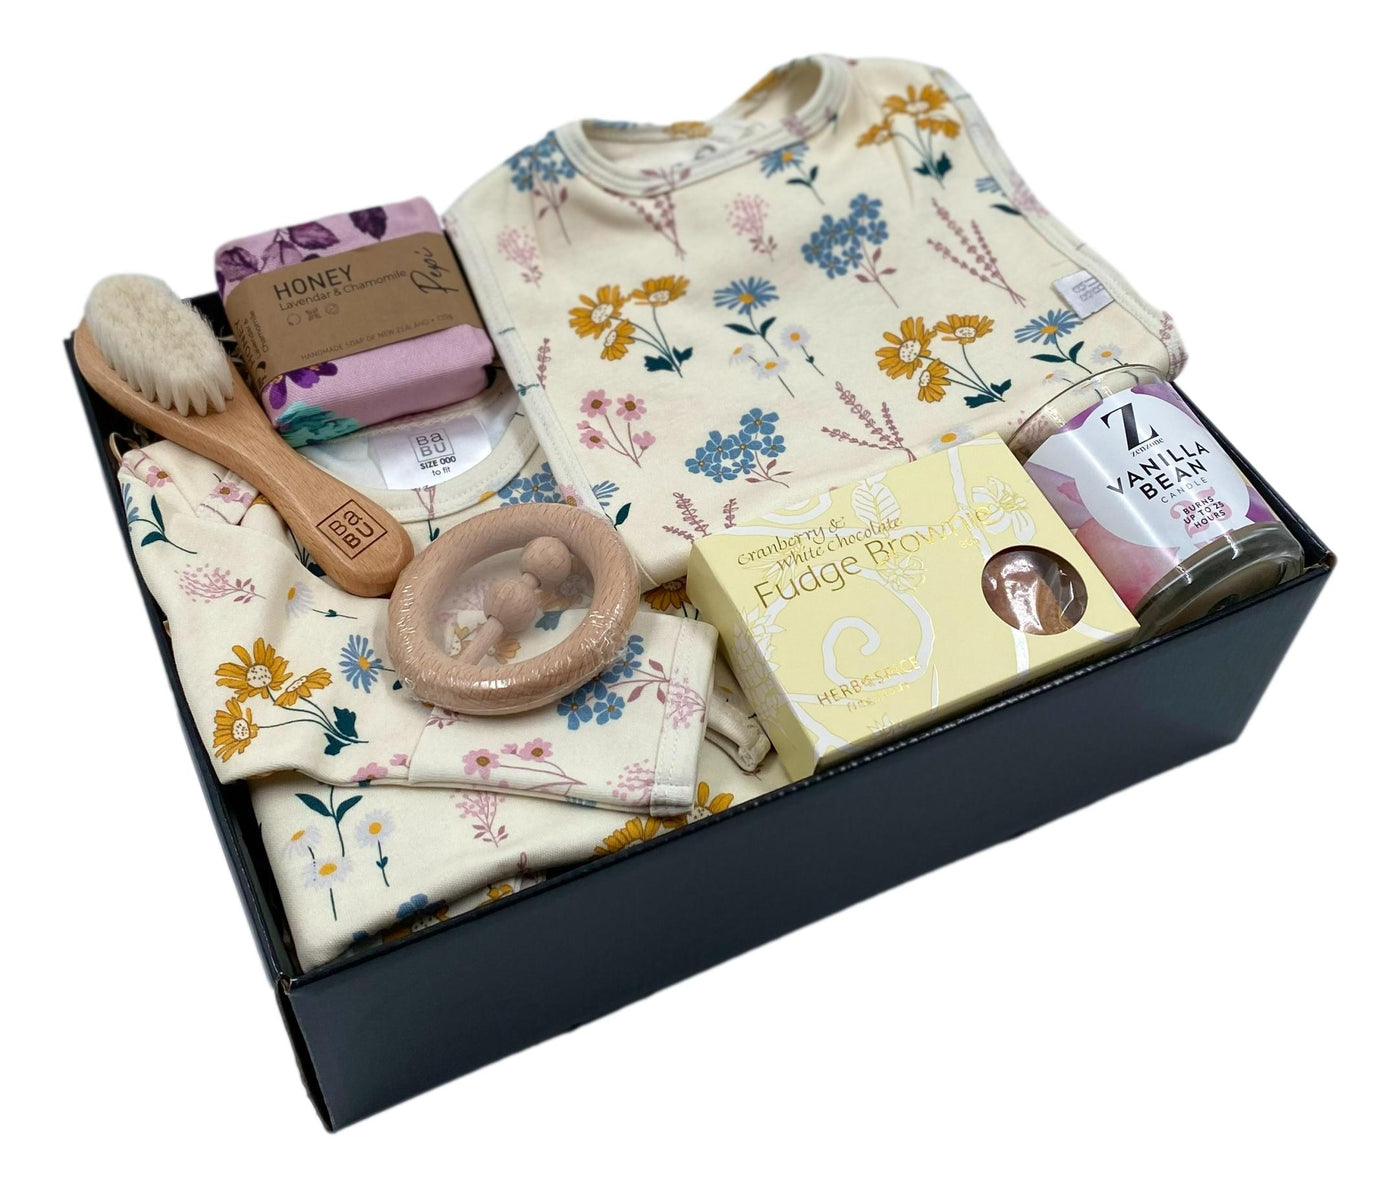 Baby Shower Gifts With Babu Organic Clothing and treats for the new mum to be.